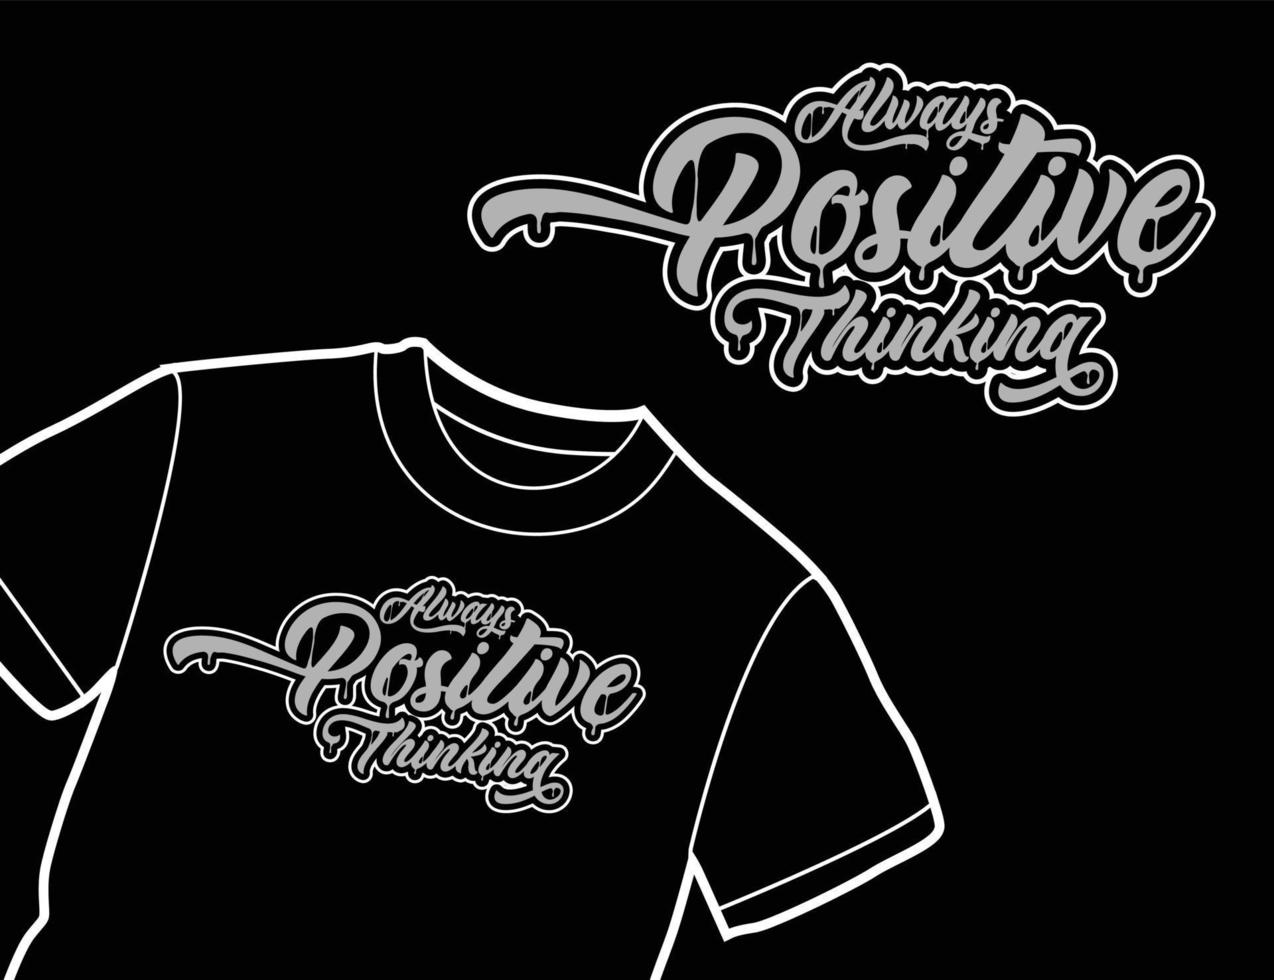 Always Positive Thinking typography vector t-shirt design is great for digital screen printing